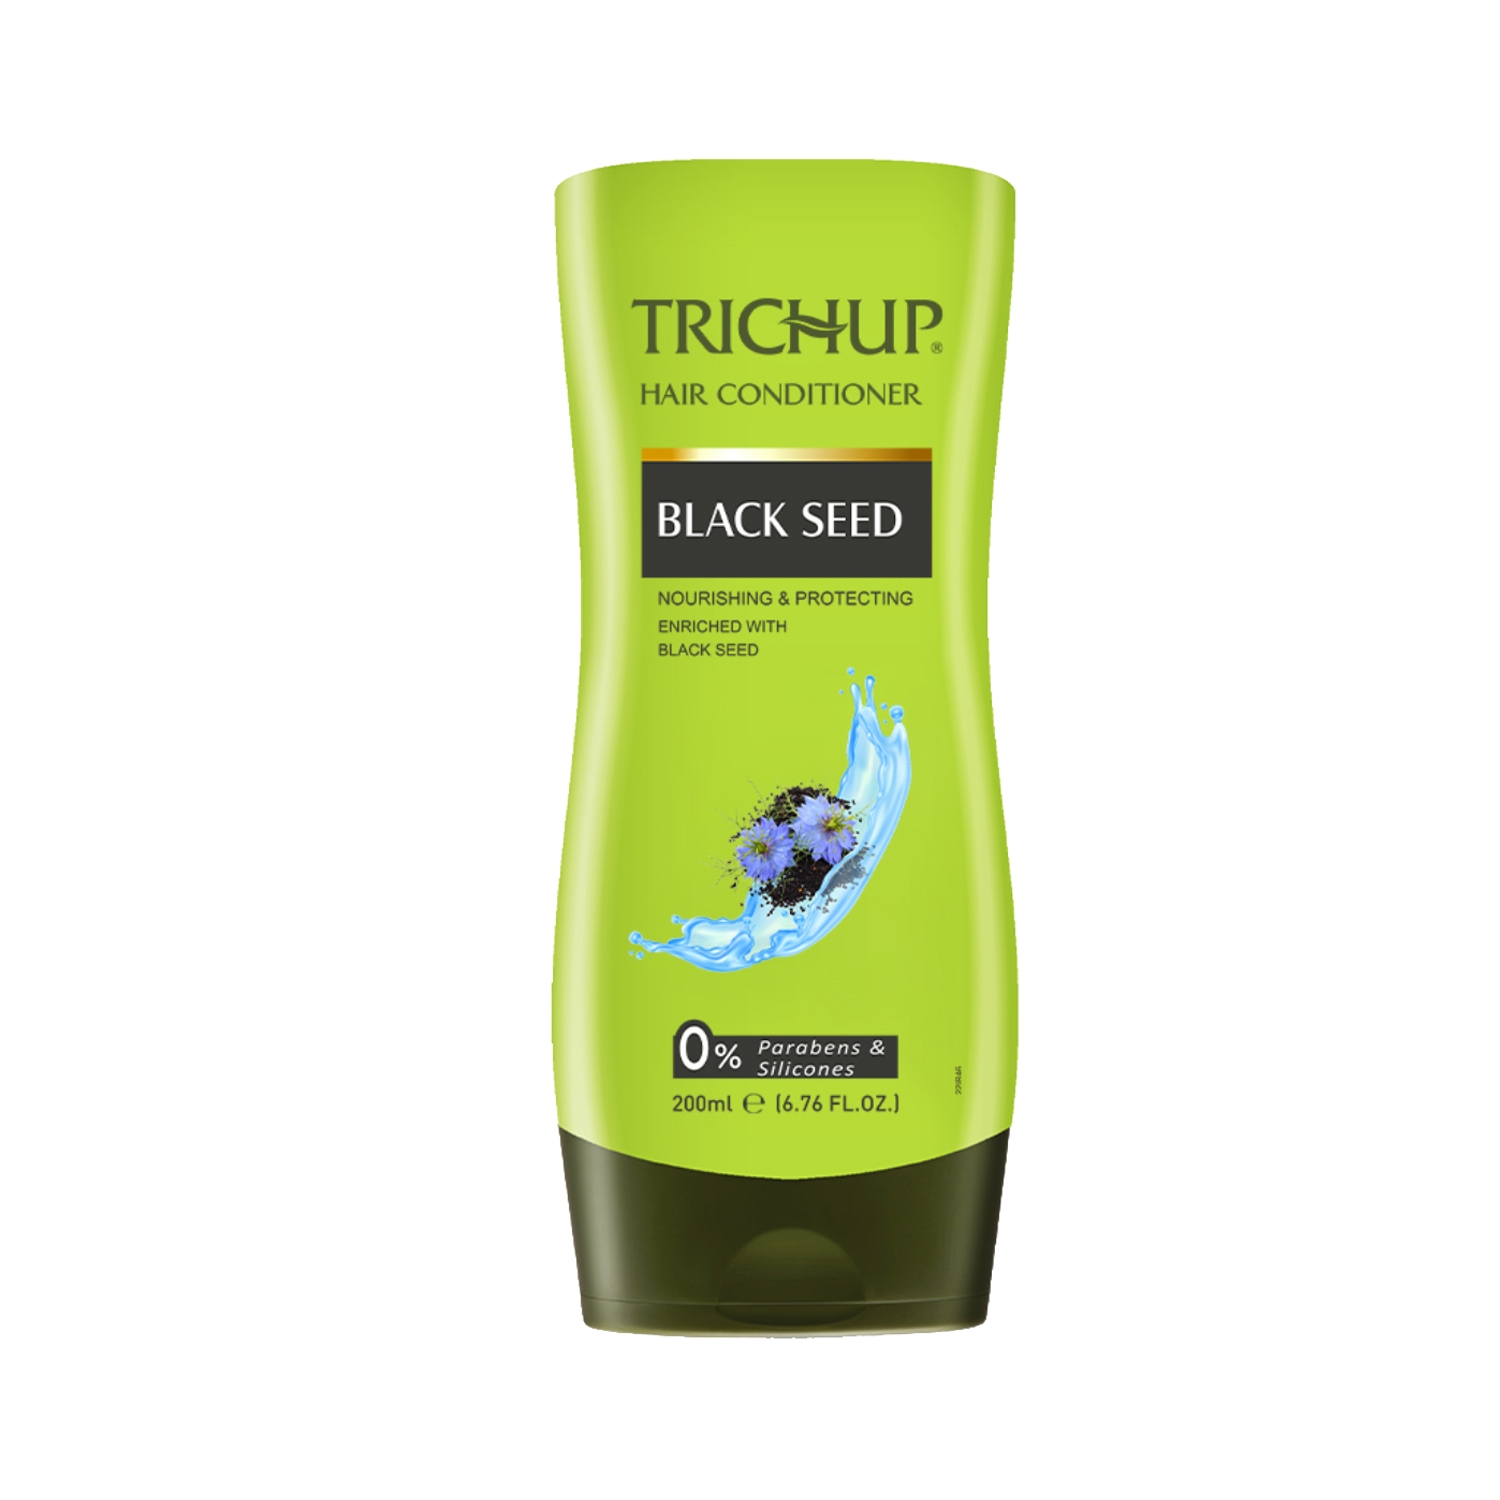 Trichup | Trichup Black Seed Hair Conditioner (200ml)